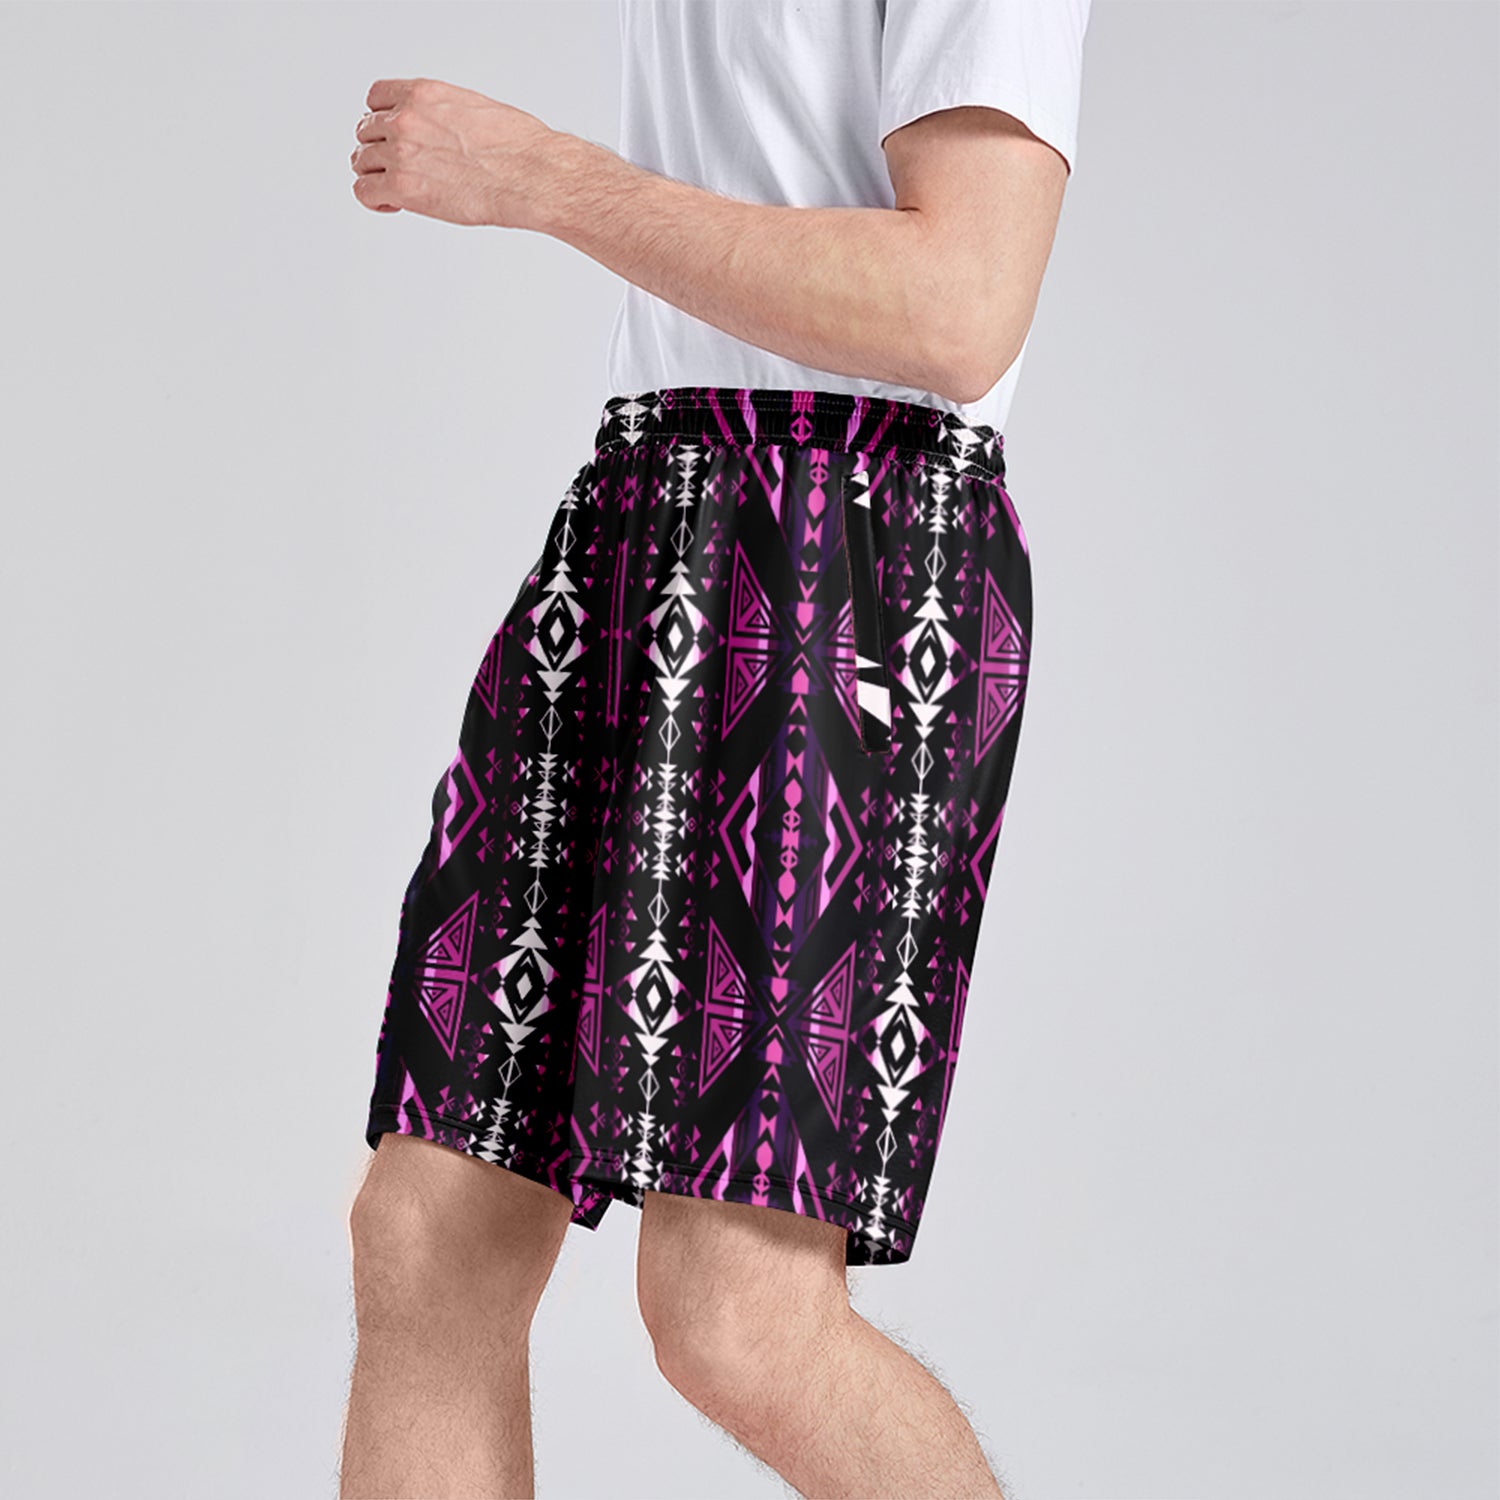 Upstream Expedition Moonlight Shadows Athletic Shorts with Pockets